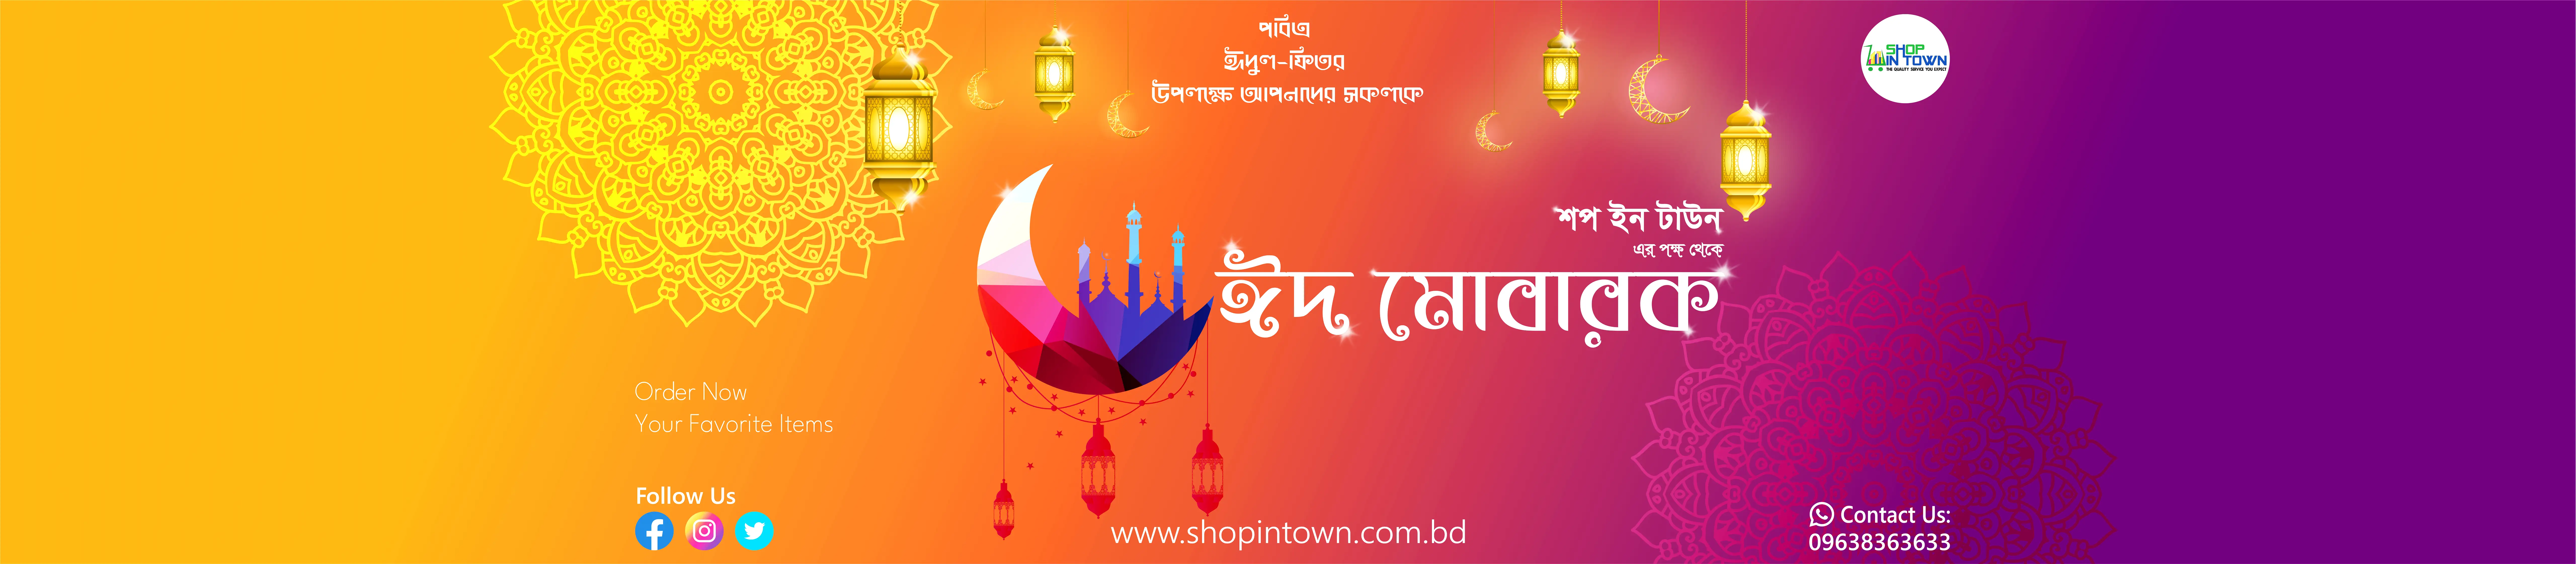 Shop IN Town - শপ ইন টাউন promo